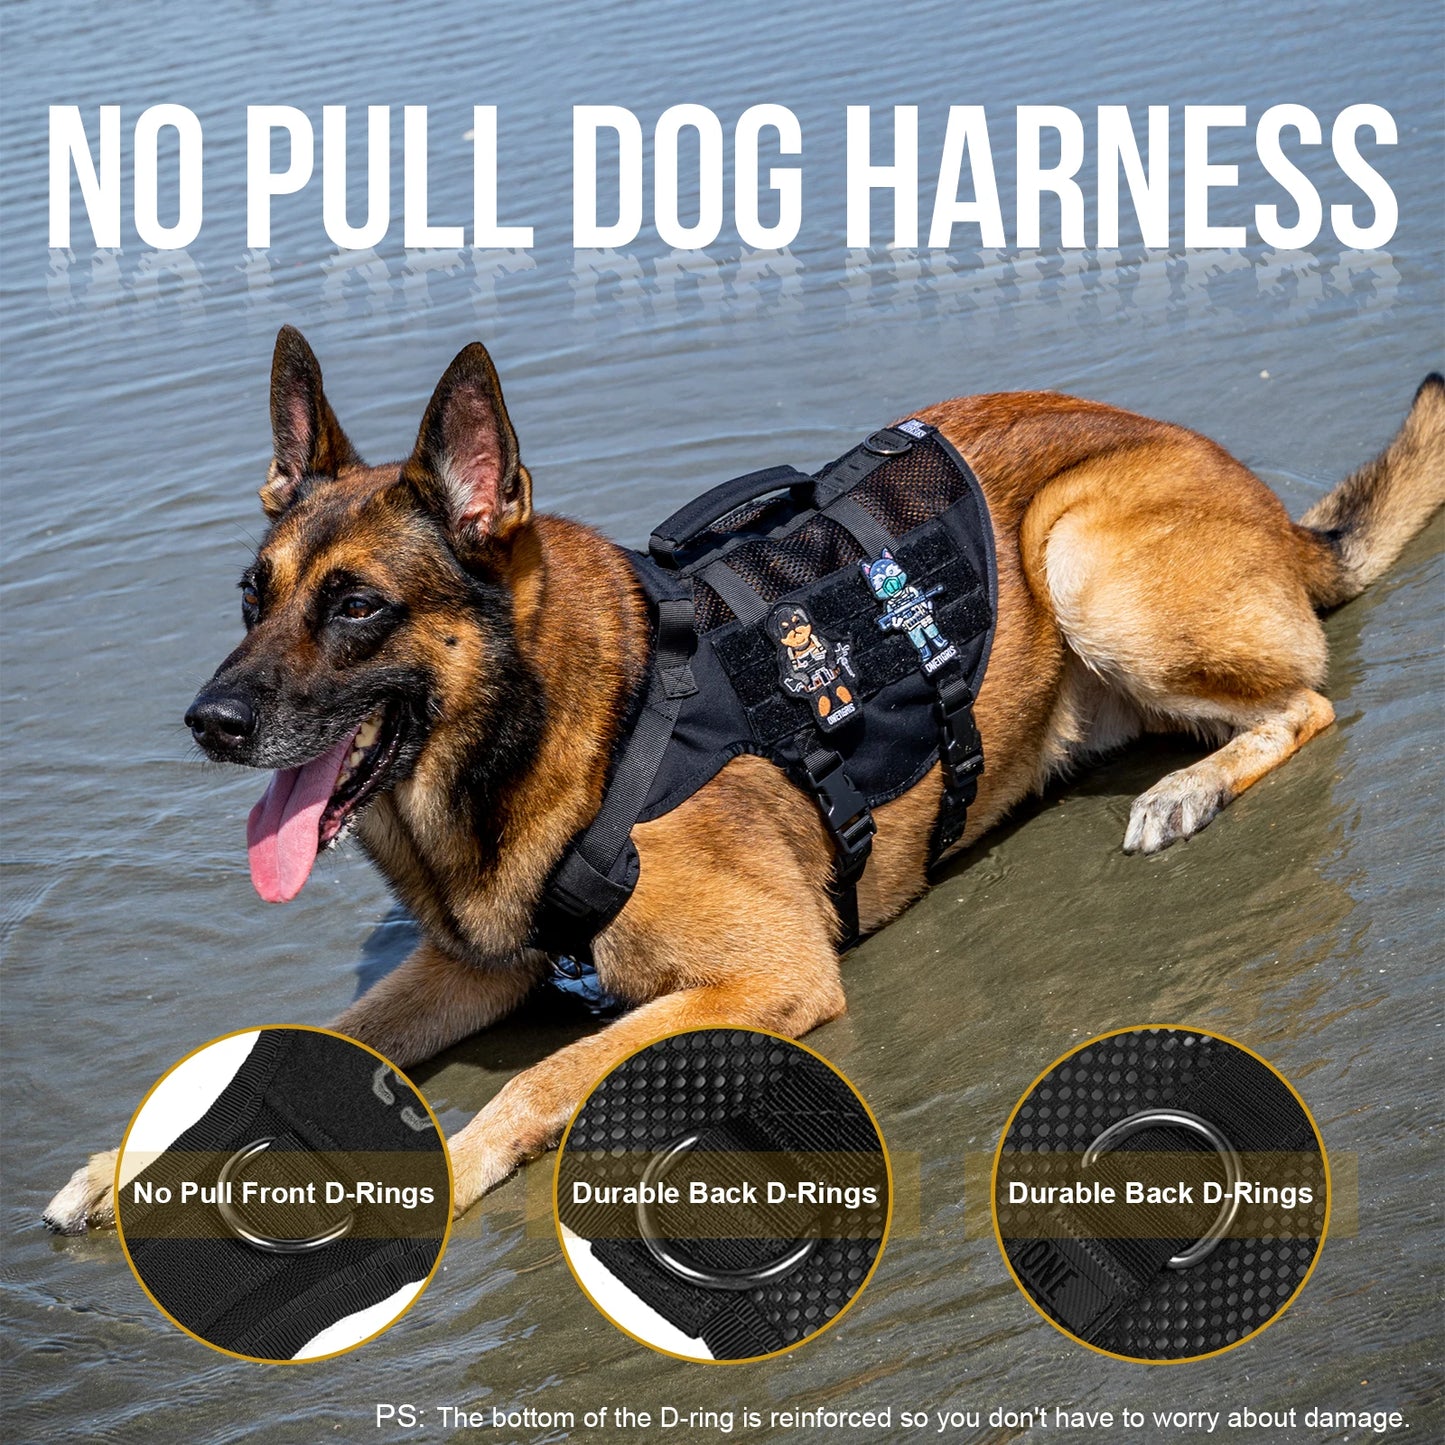 OneTigris AIRE Mesh Dog Harness